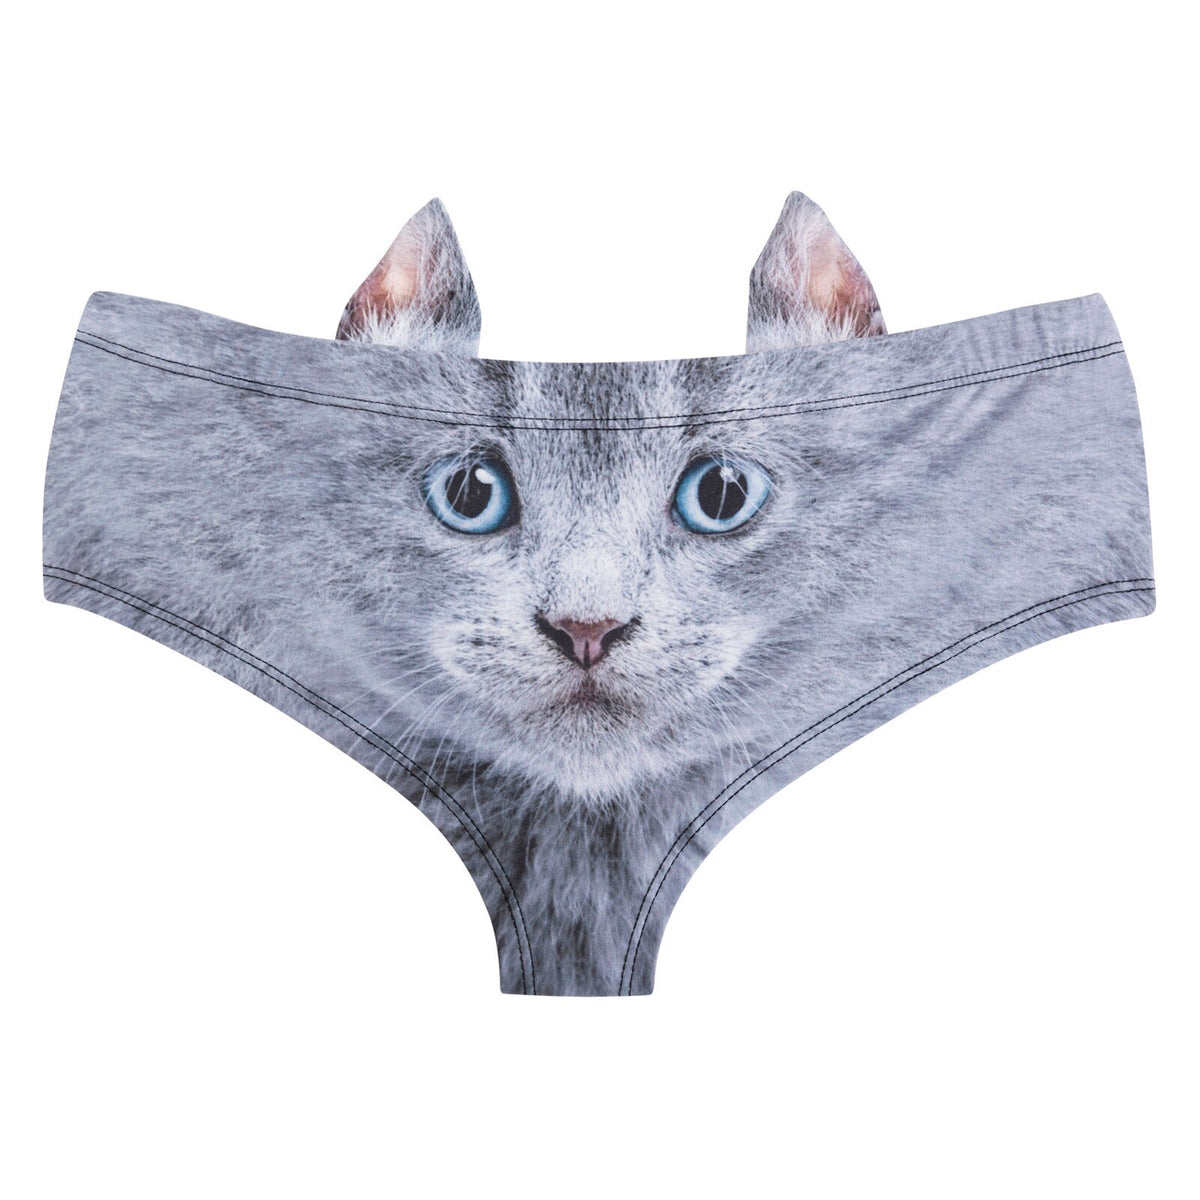 Cat Underwear with Ears | Cats Lover